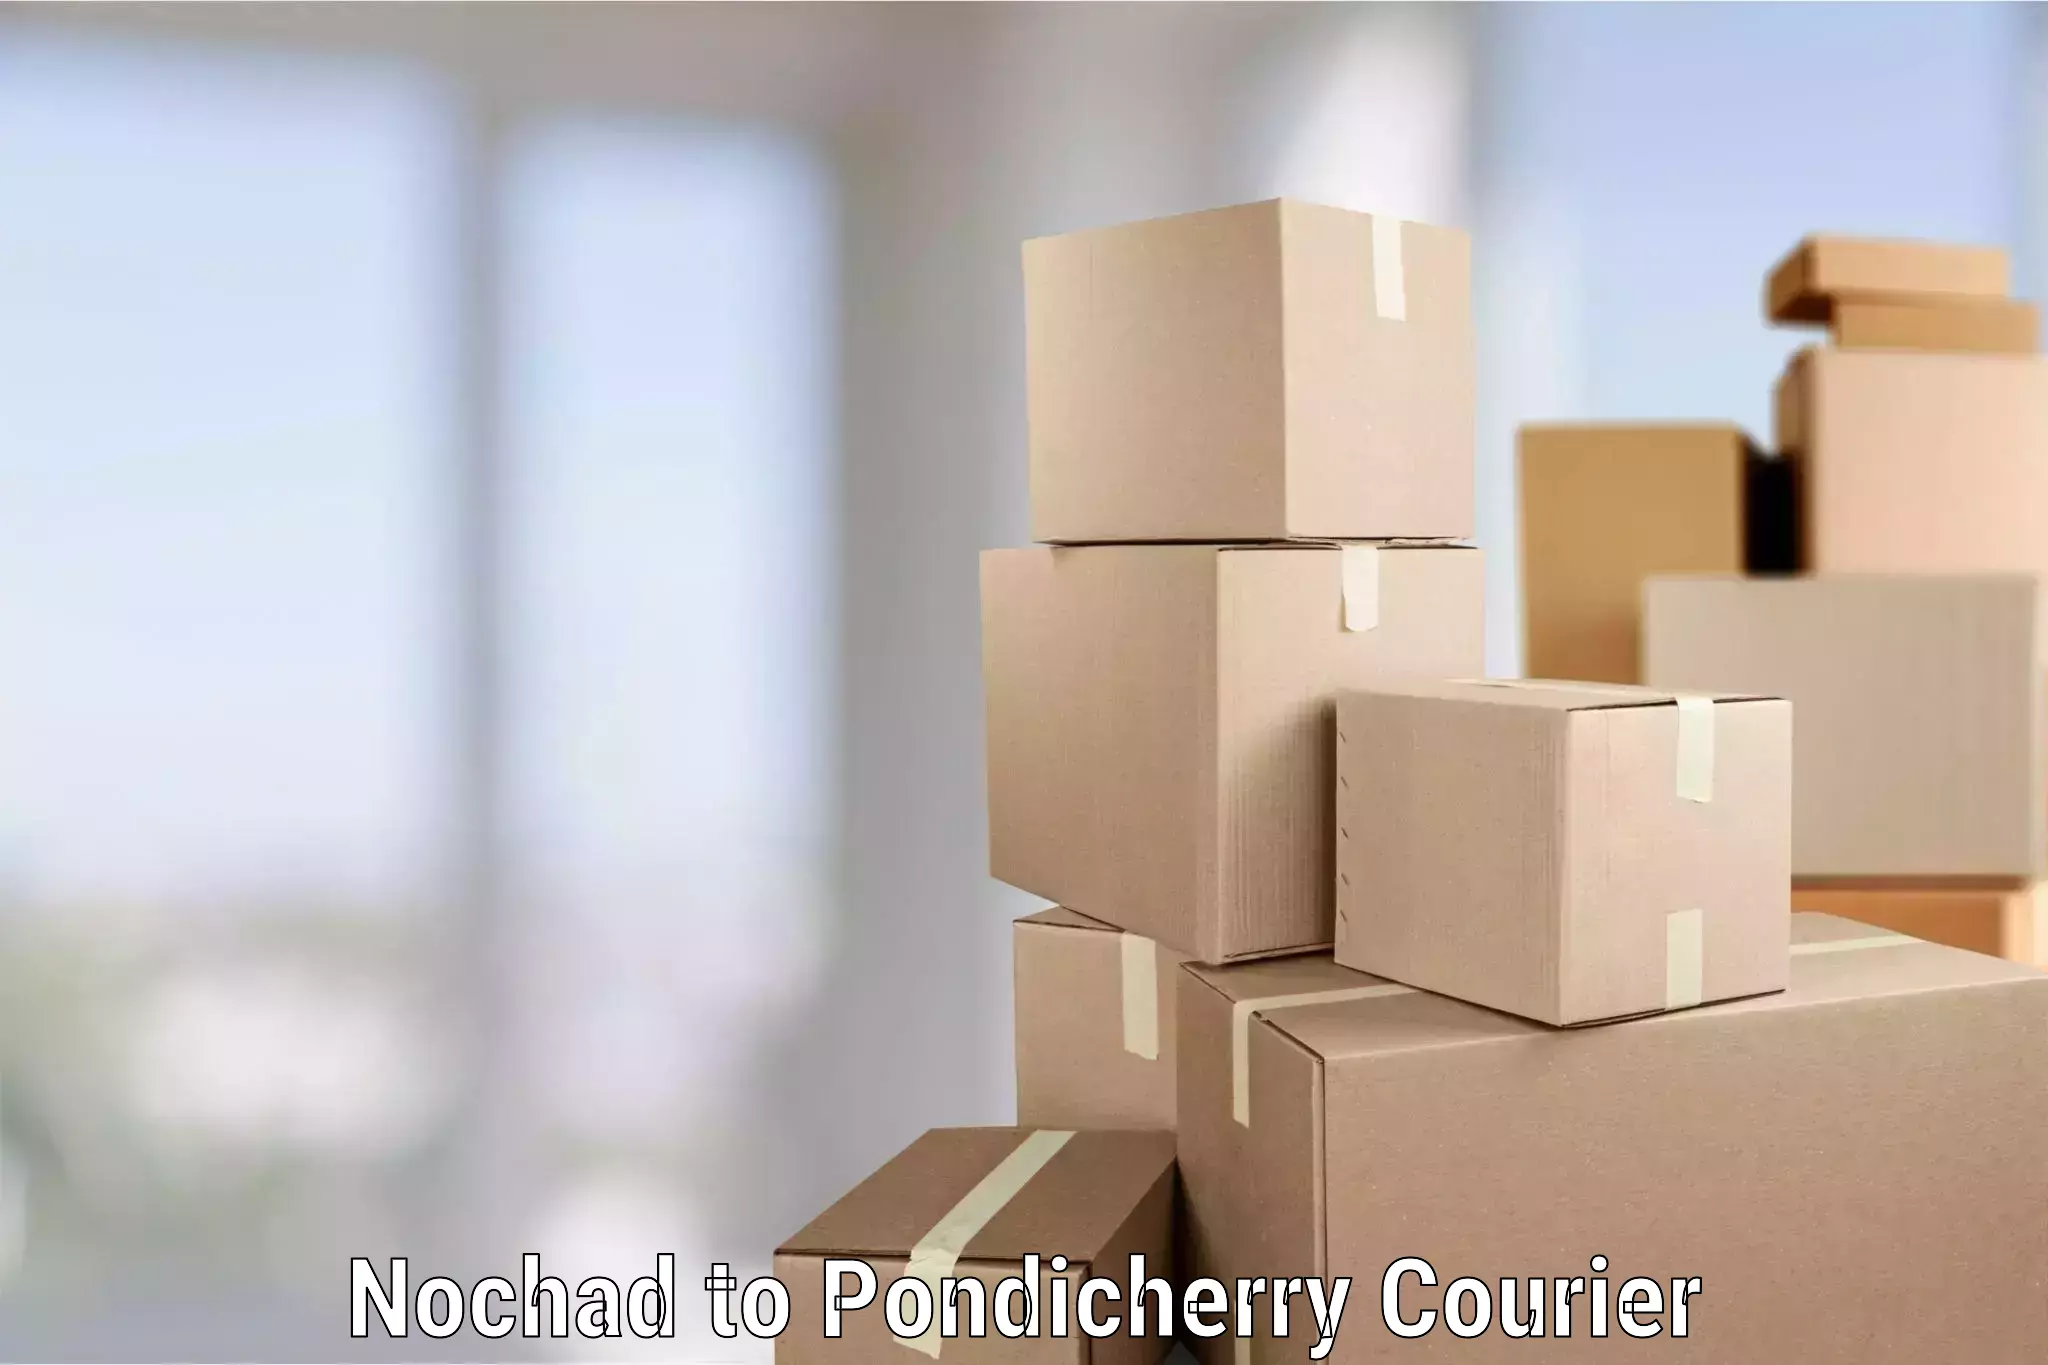 Household moving experts Nochad to Pondicherry